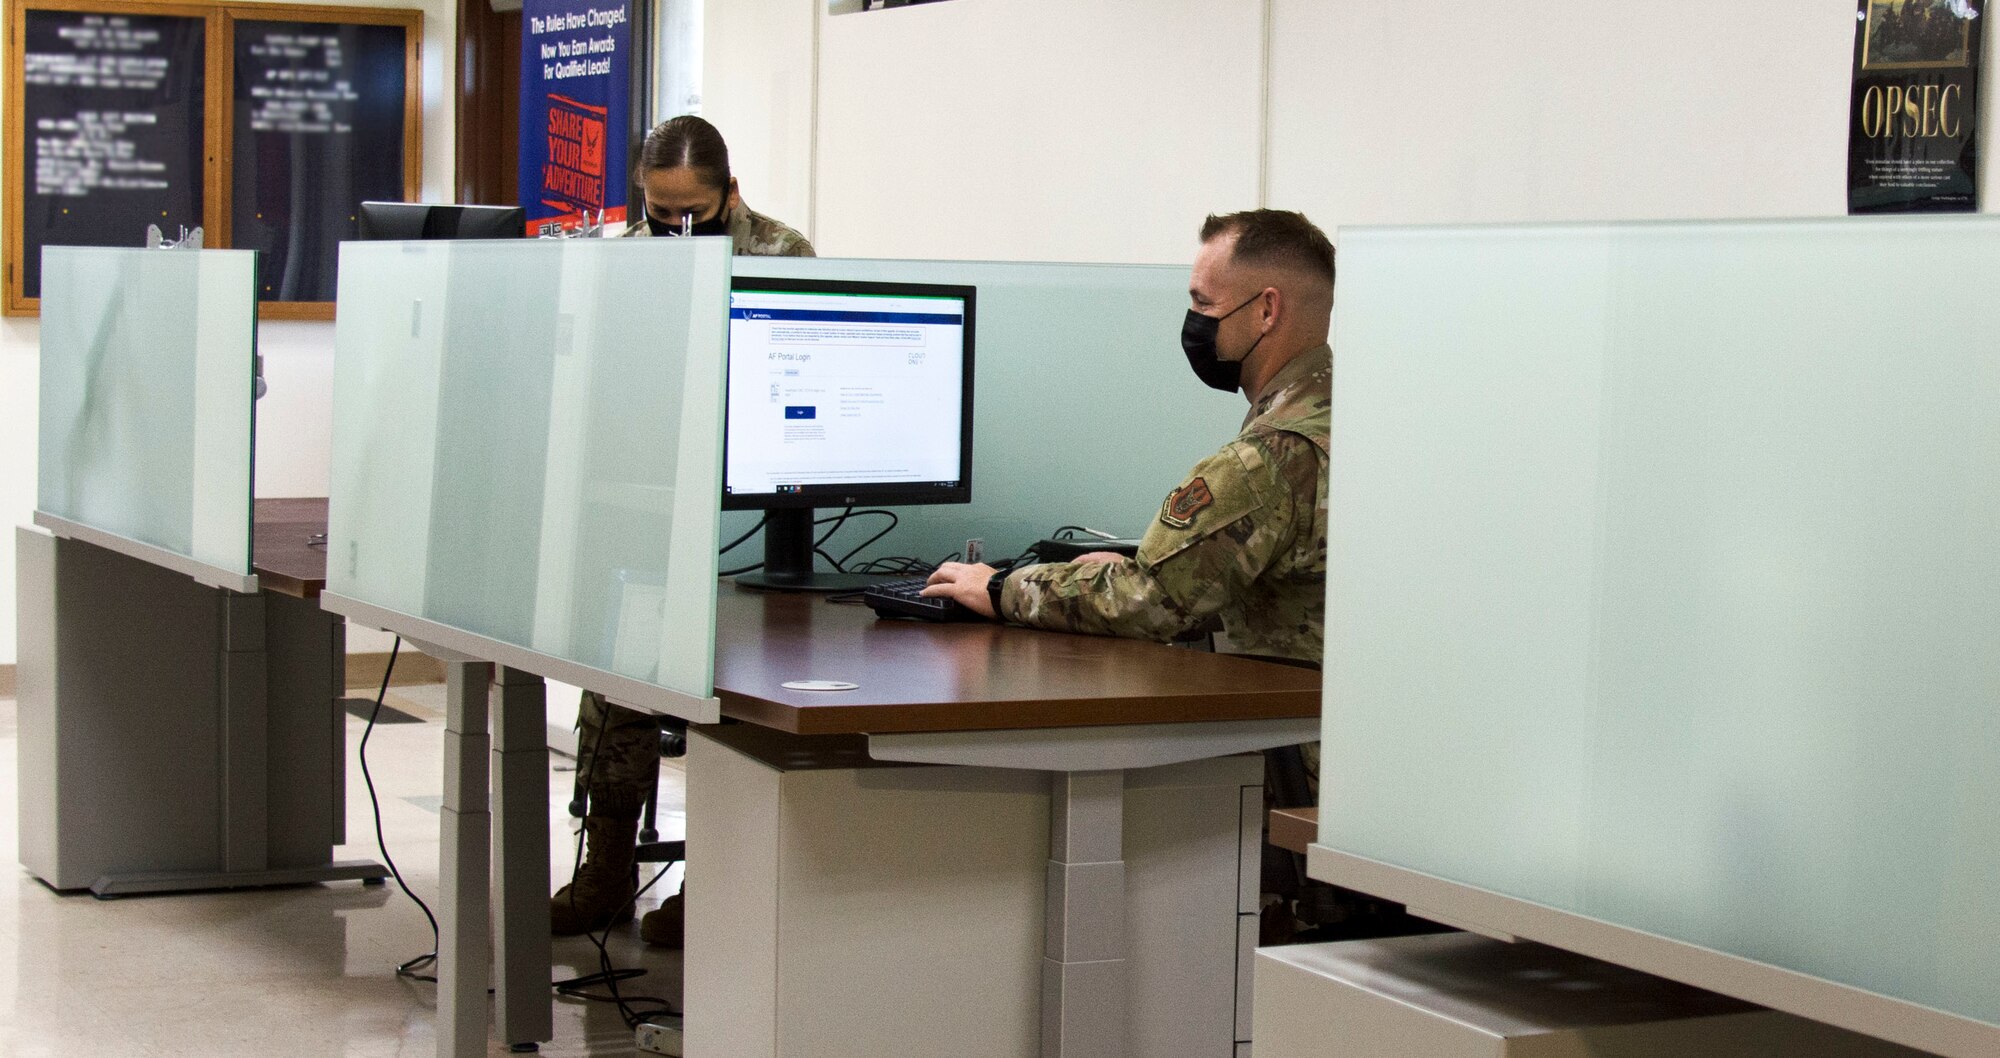 Photo of U.S. Air Force Master Sgt. Louisa Togawa, left, and Master Sgt. David Popp of the 44th Aerial Port Squadron utilizing the recently built cybercafe at Andersen Air Force Base, Guam, July 28, 2020. The cybercafe was created to increase internet accessibility by optimizing workspace utilization through the use of squadron innovation funds from AFWERX, the Air Force’s innovation program. (U.S. Air Force photo by Tech. Sgt. Tricia C. Topasna)